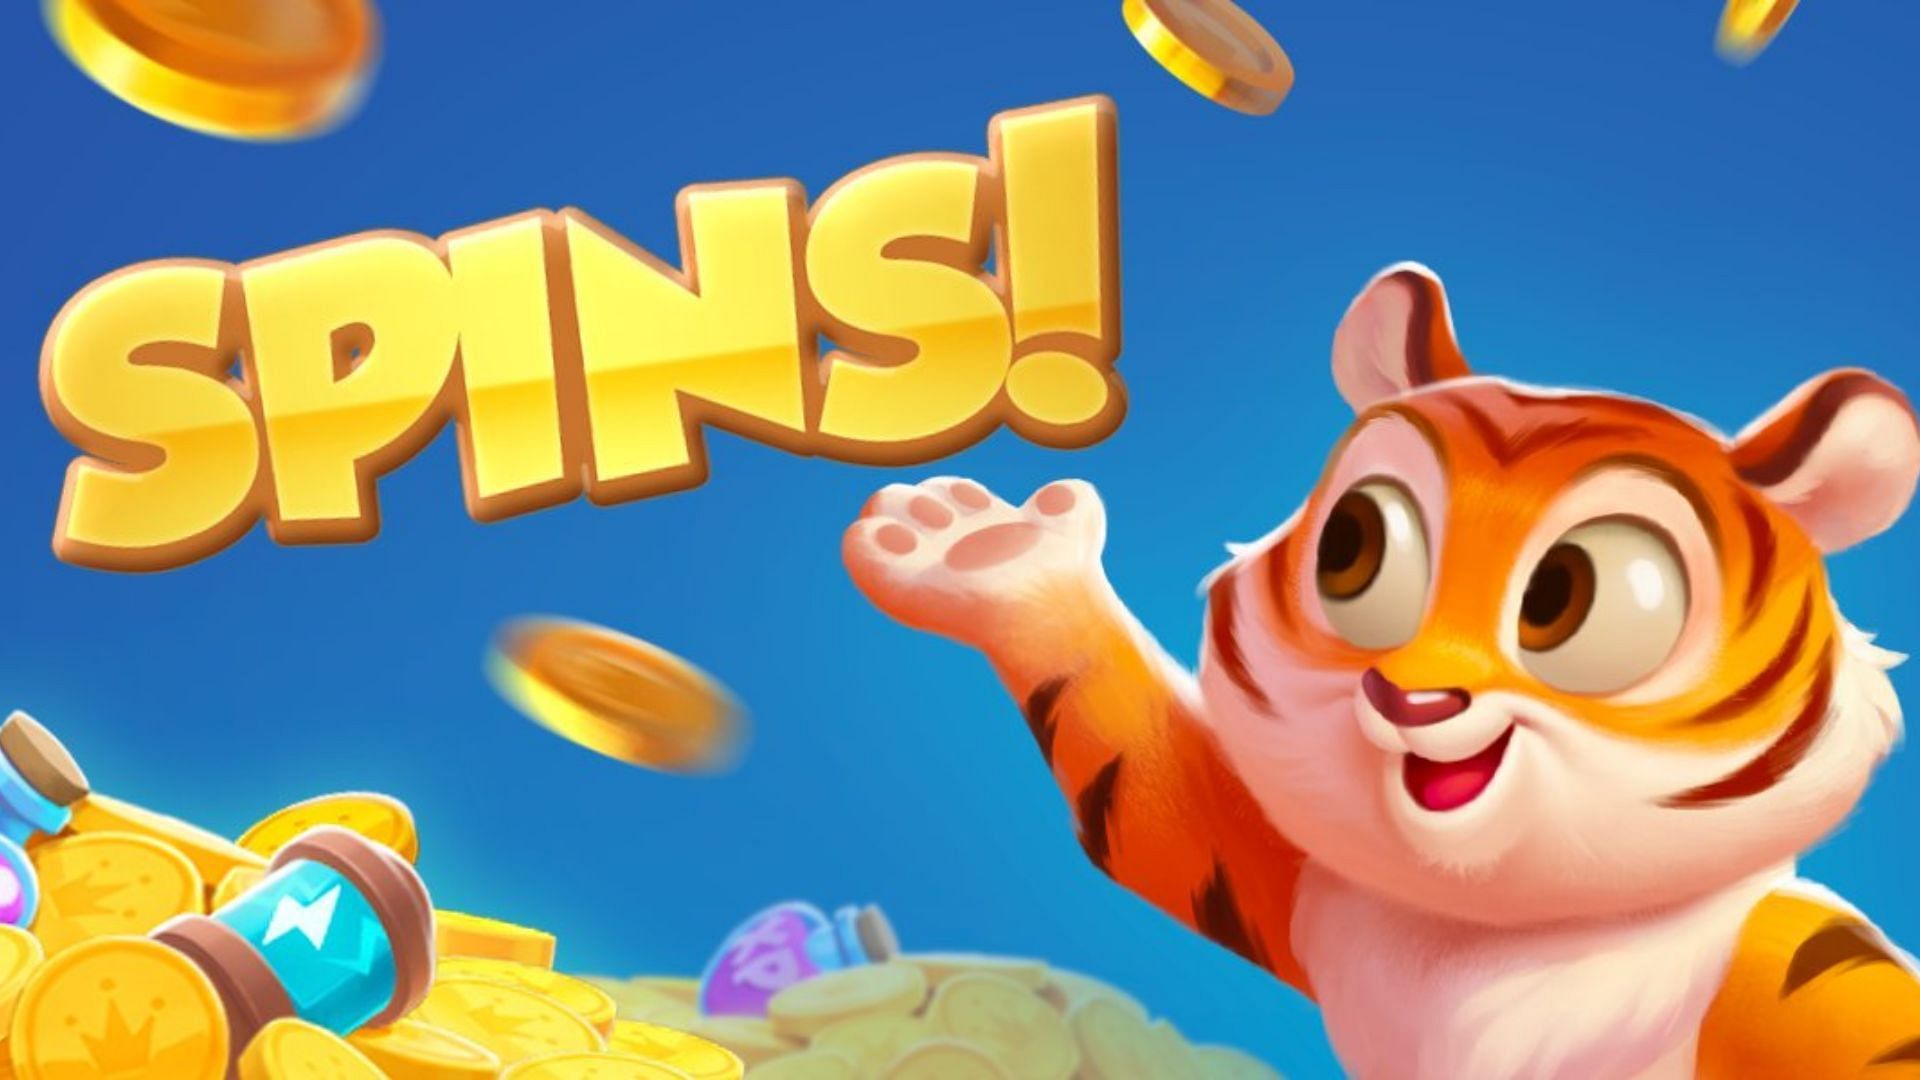 You can get free spins by redeeming the links daily. (Image via Moon Active)